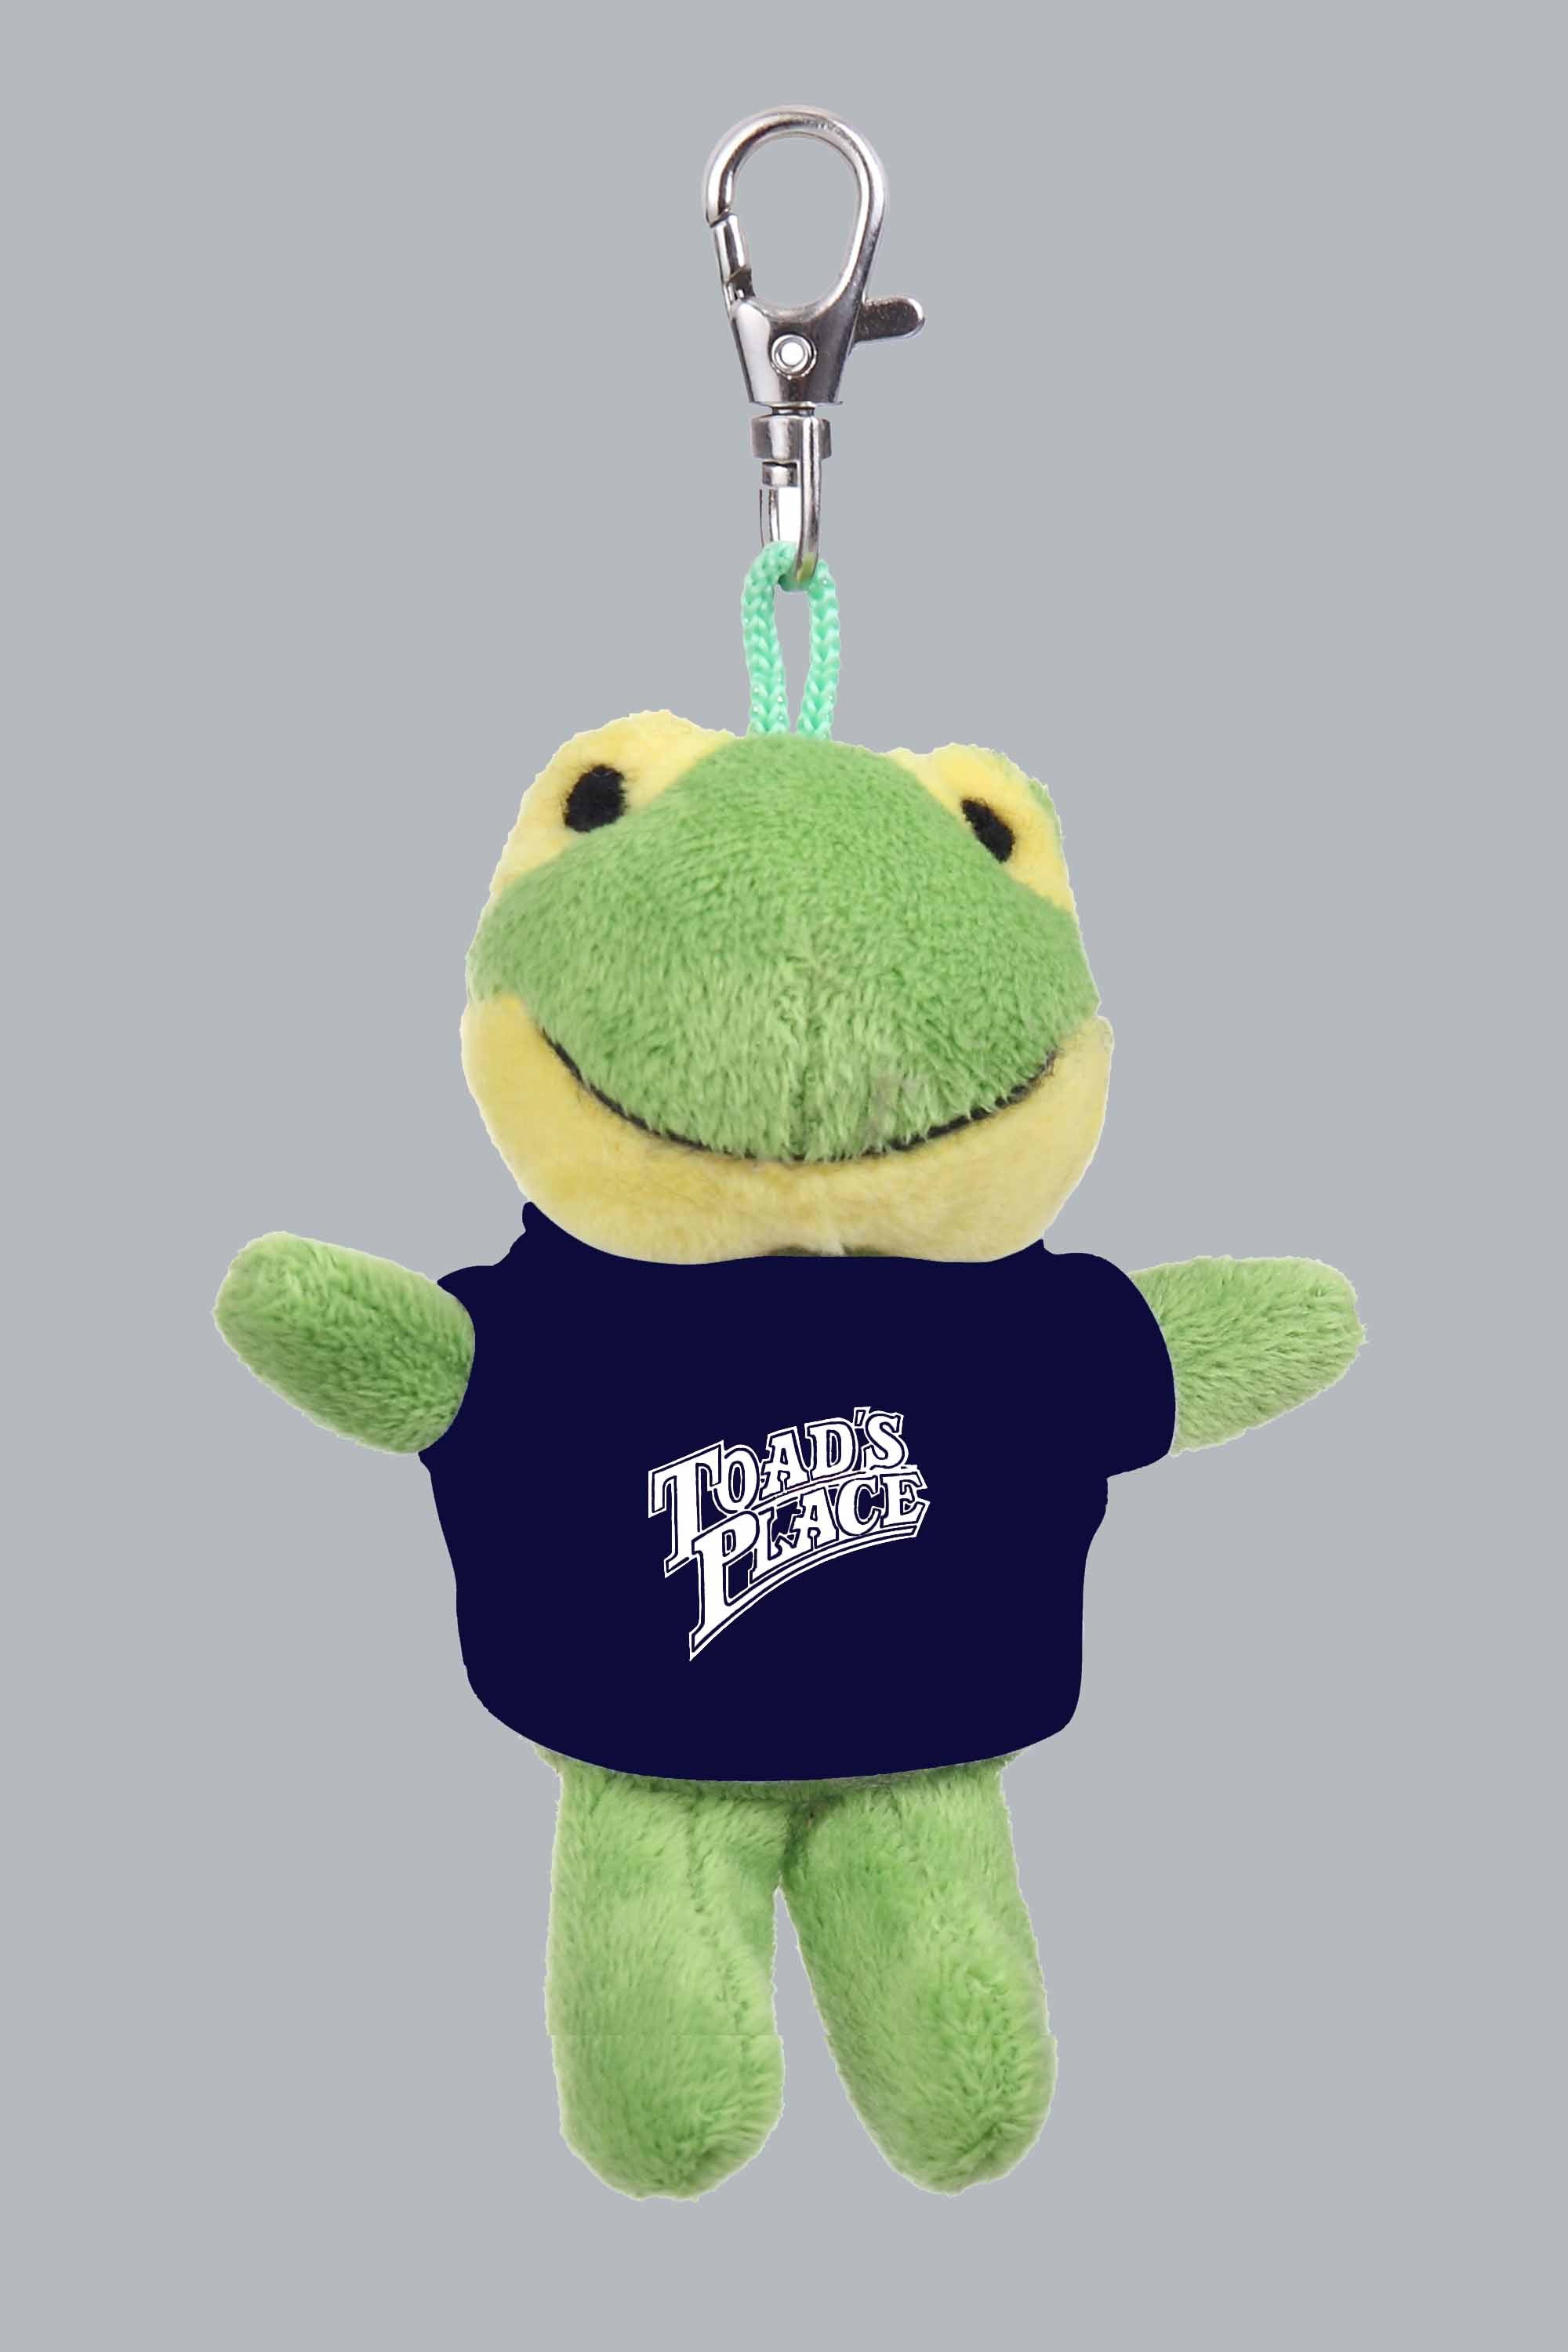 ** LIMITED EDITION ** Plush Toad Keychain